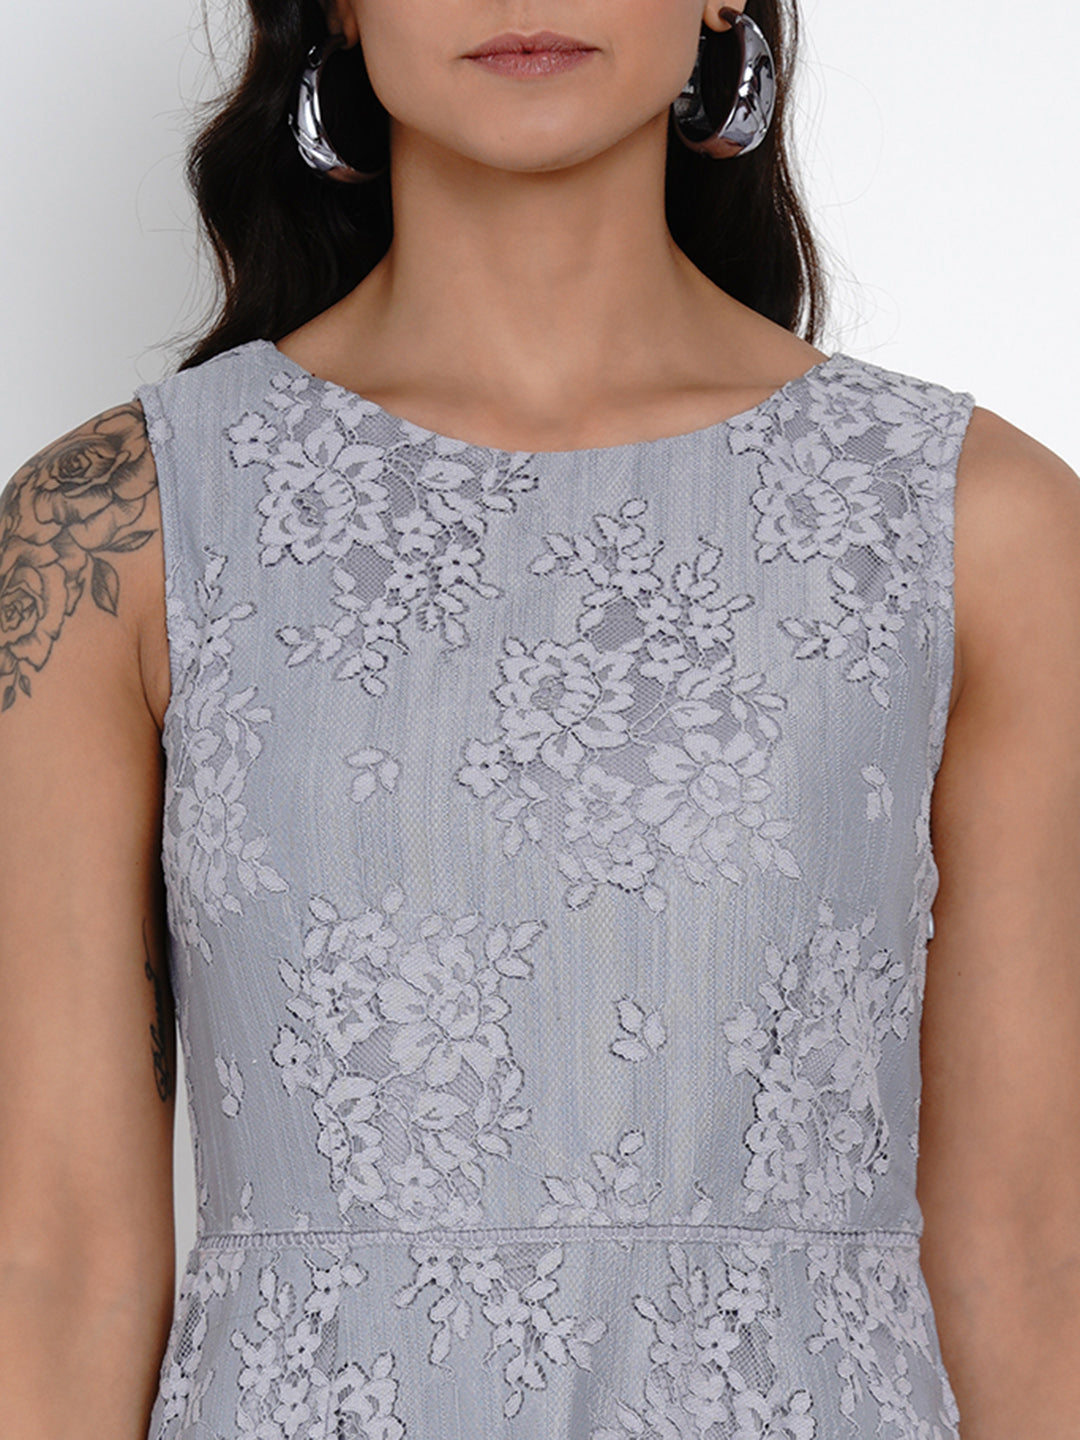 Grey Sleeveless A-Line Dress With Lace